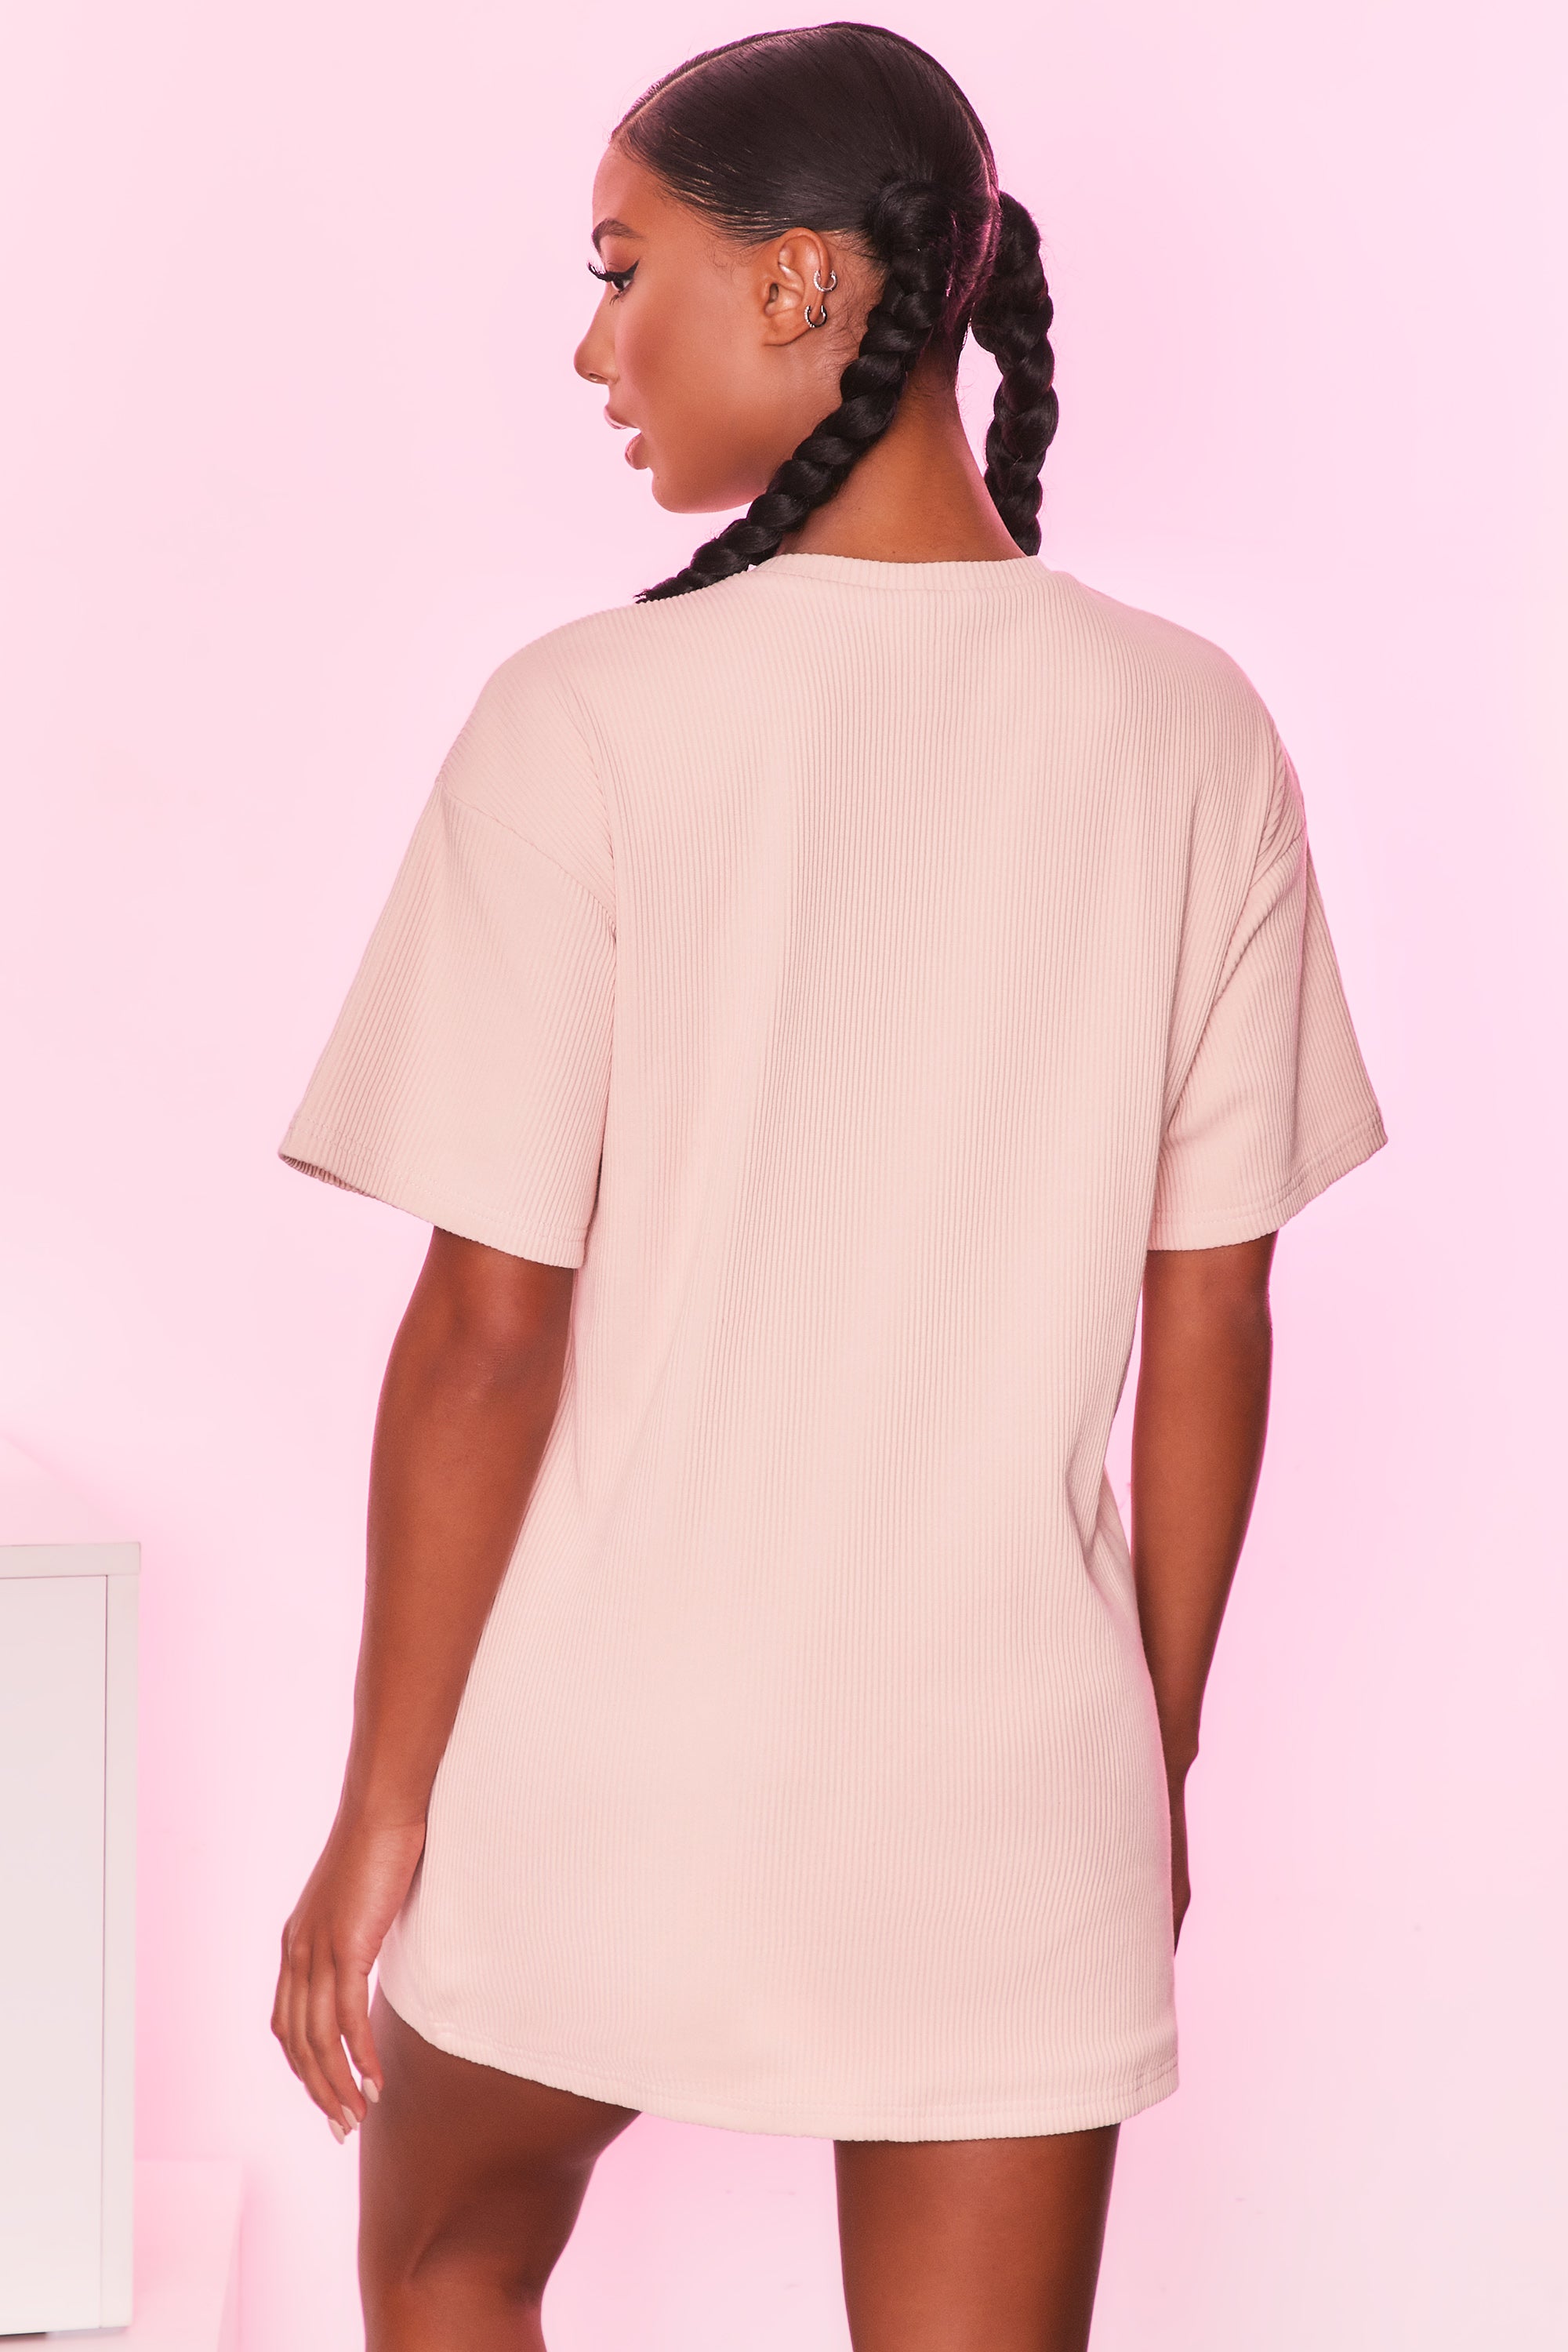 Take It Easy Ribbed Oversized T-Shirt in Cream